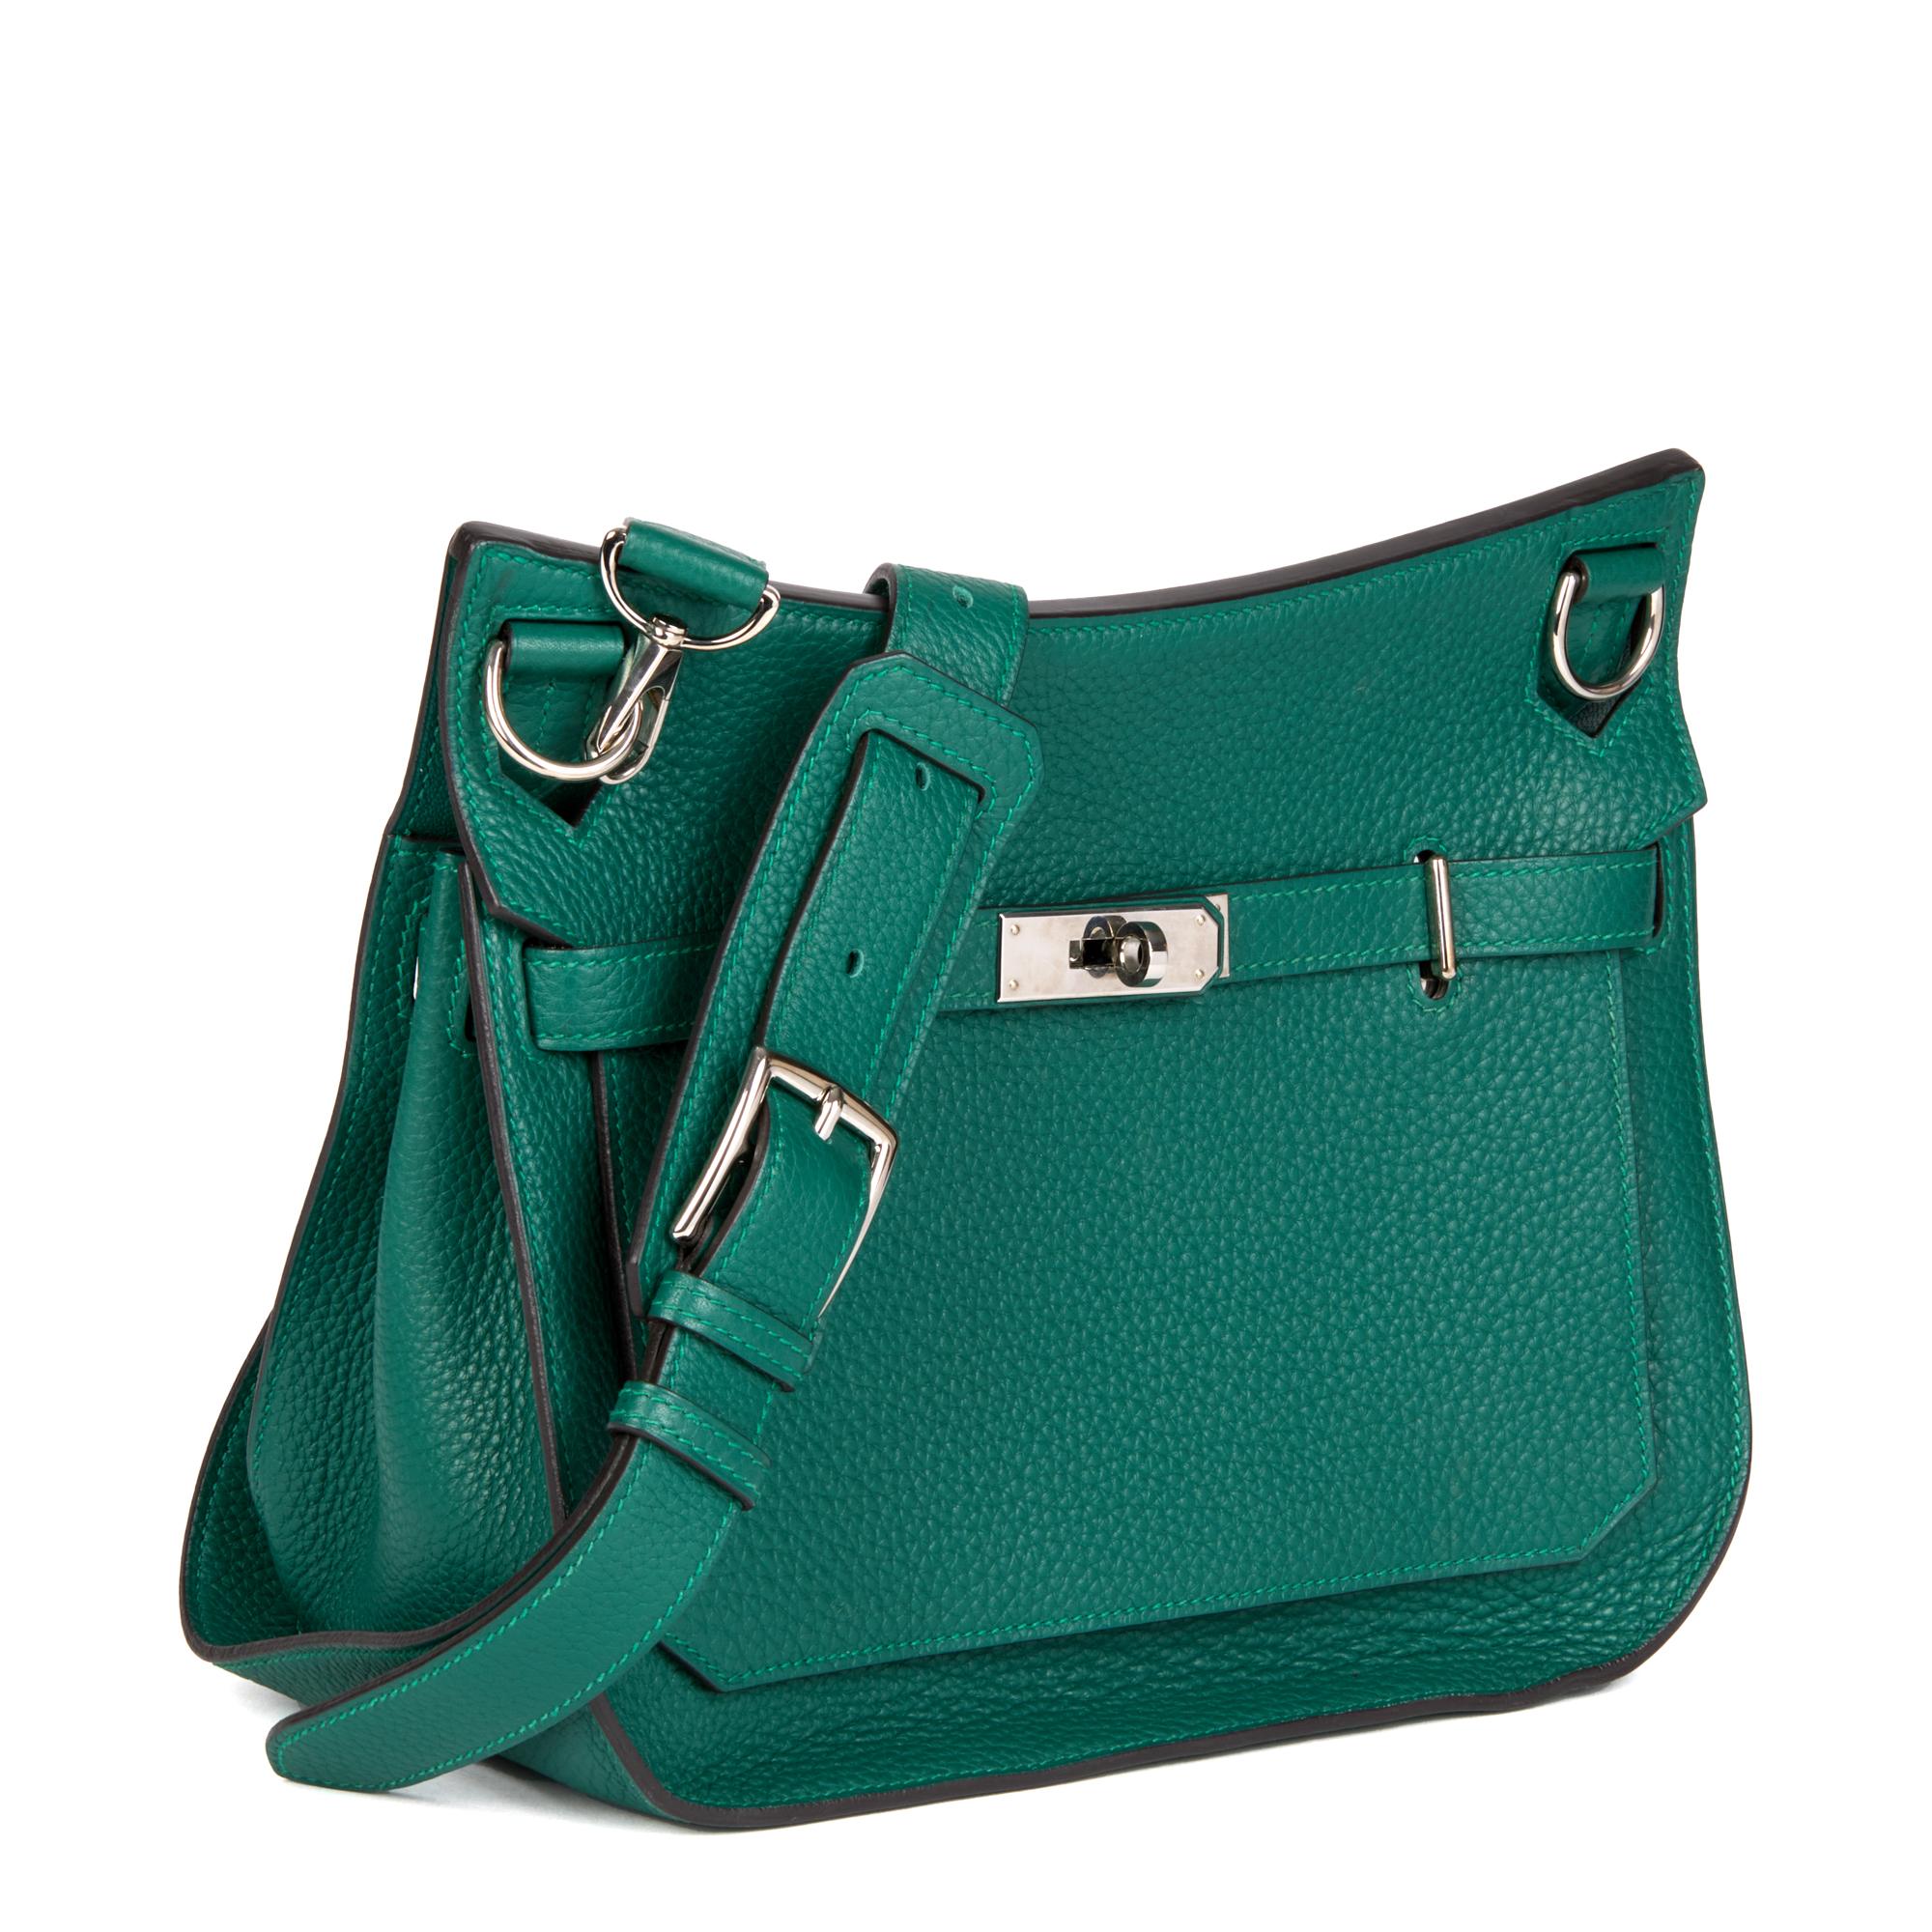 HERMÈS
Malachite Clemence Leather Jypsiere 28

Xupes Reference: HB4442
Serial Number: [R]
Age (Circa): 2015
Accompanied By: Hermès Dust Bag, Box, Shoulder Strap
Authenticity Details: Date Stamp (Made in France)
Gender: Ladies
Type: Shoulder,